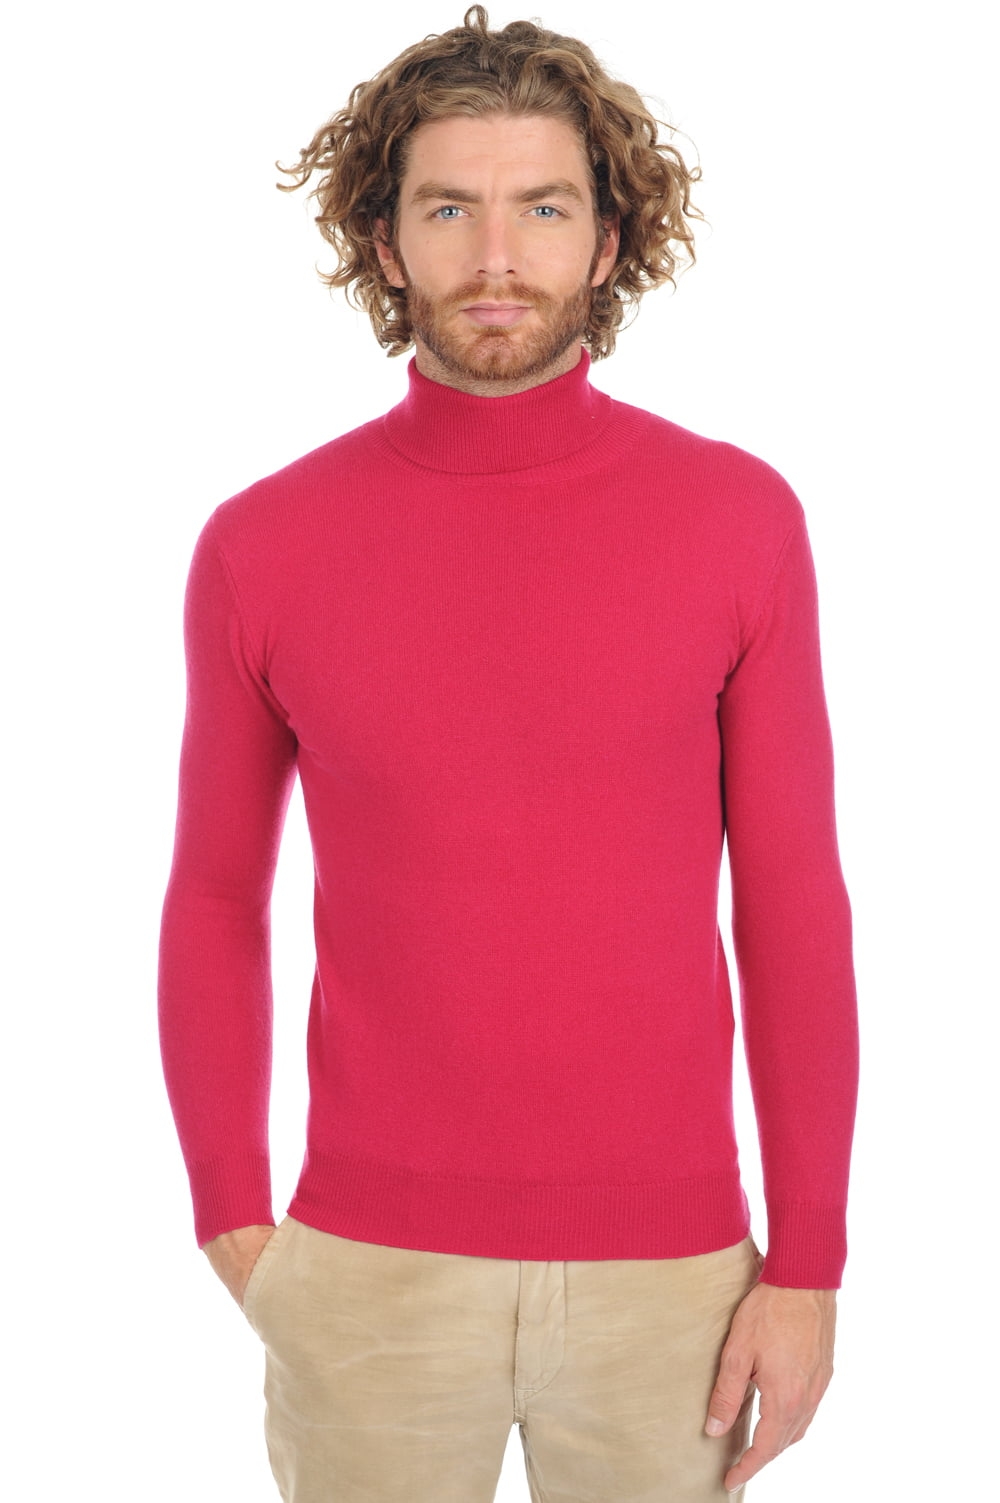 Cashmere men basic sweaters at low prices tarry first red fuschsia m